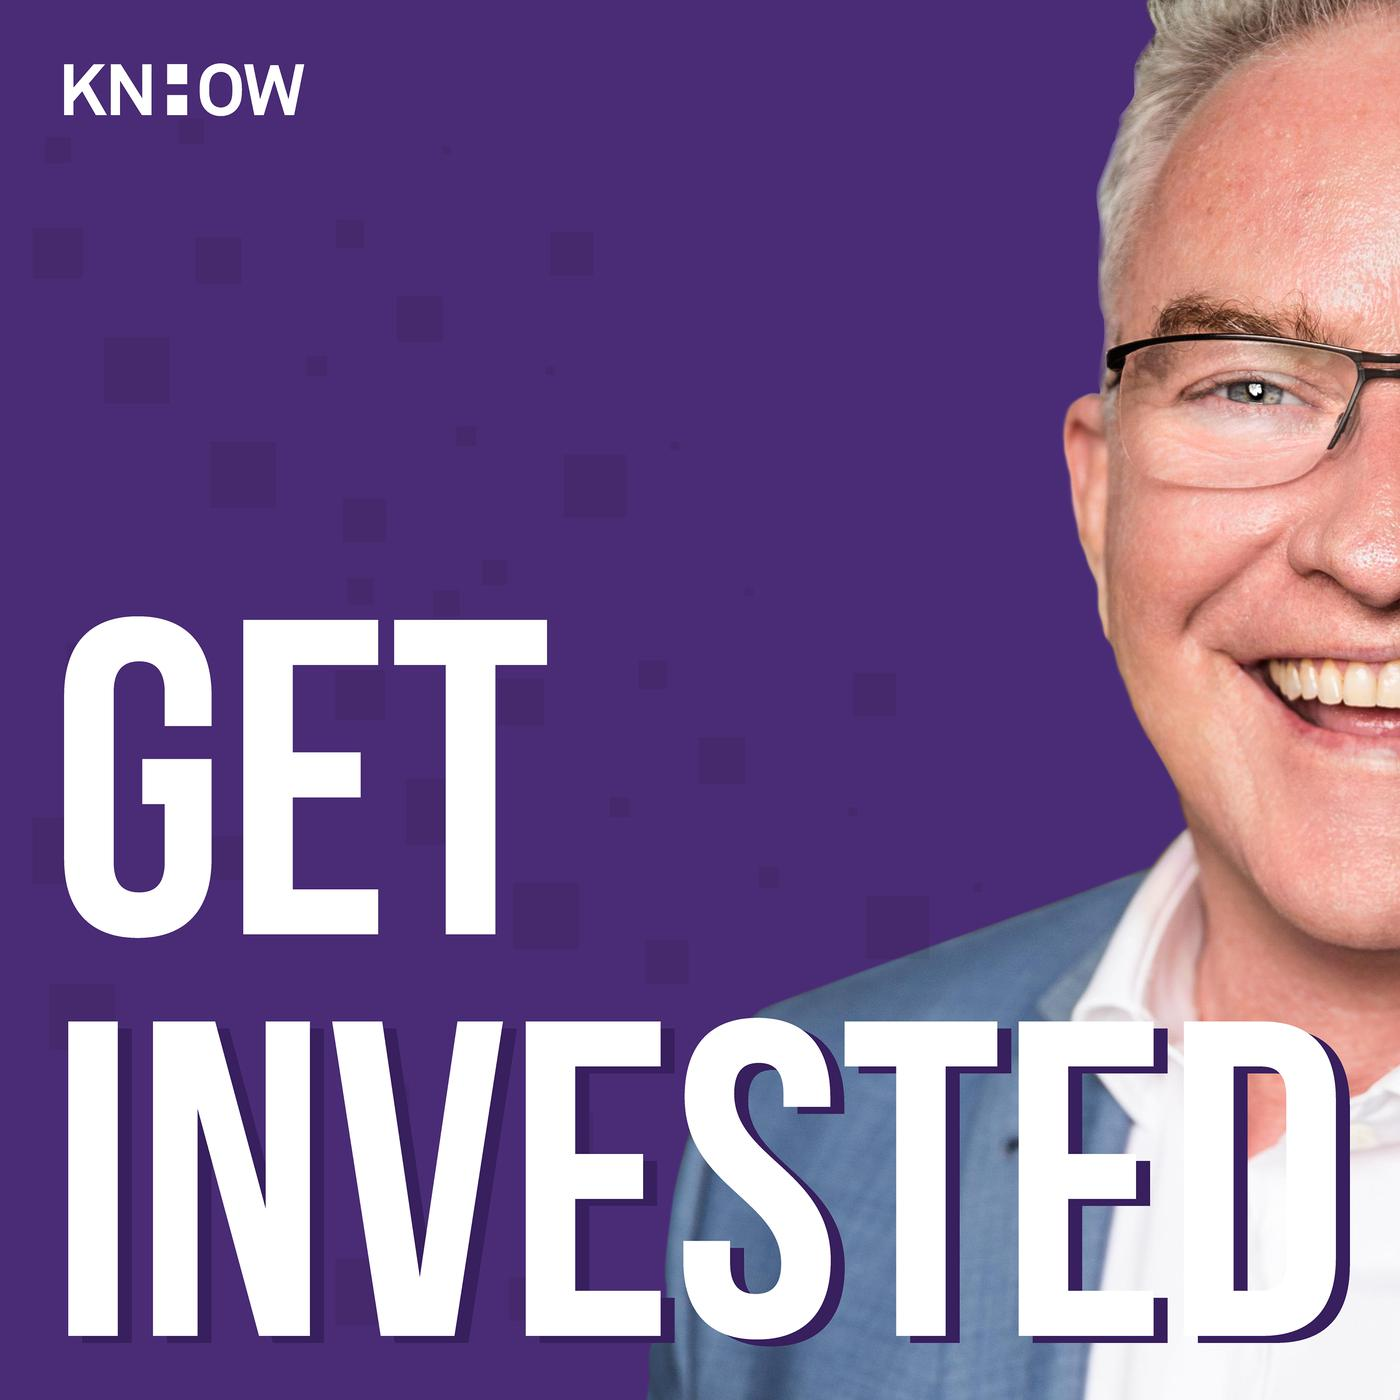 Get Invested: Part 2 - Michael Johnston on asset investment